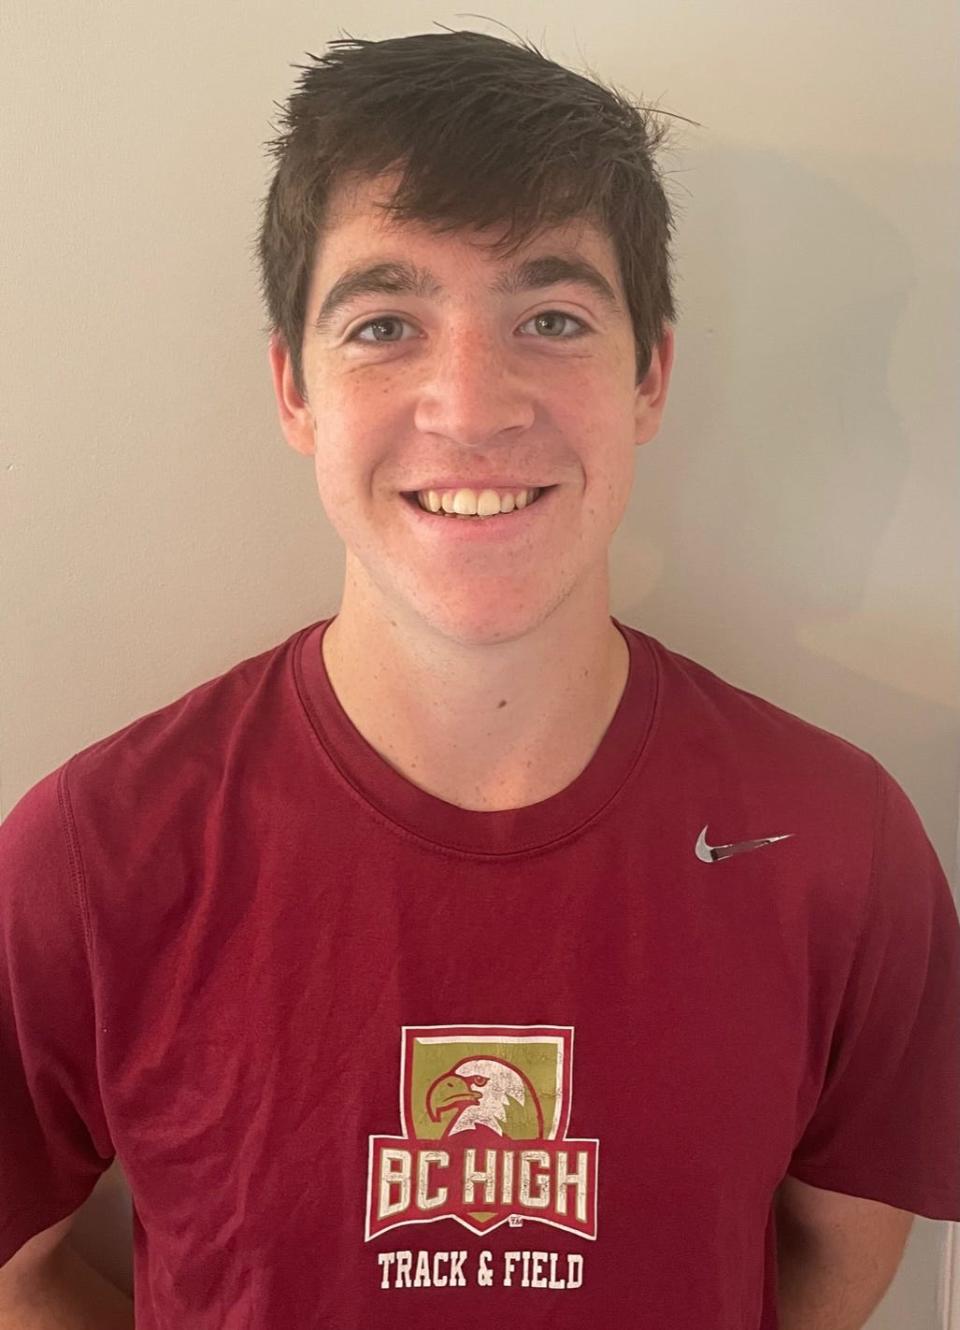 Chris Larnard of BC High has been named to The Patriot Ledger/Enterprise All-Scholastic Boys Outdoor Track & Field Team.